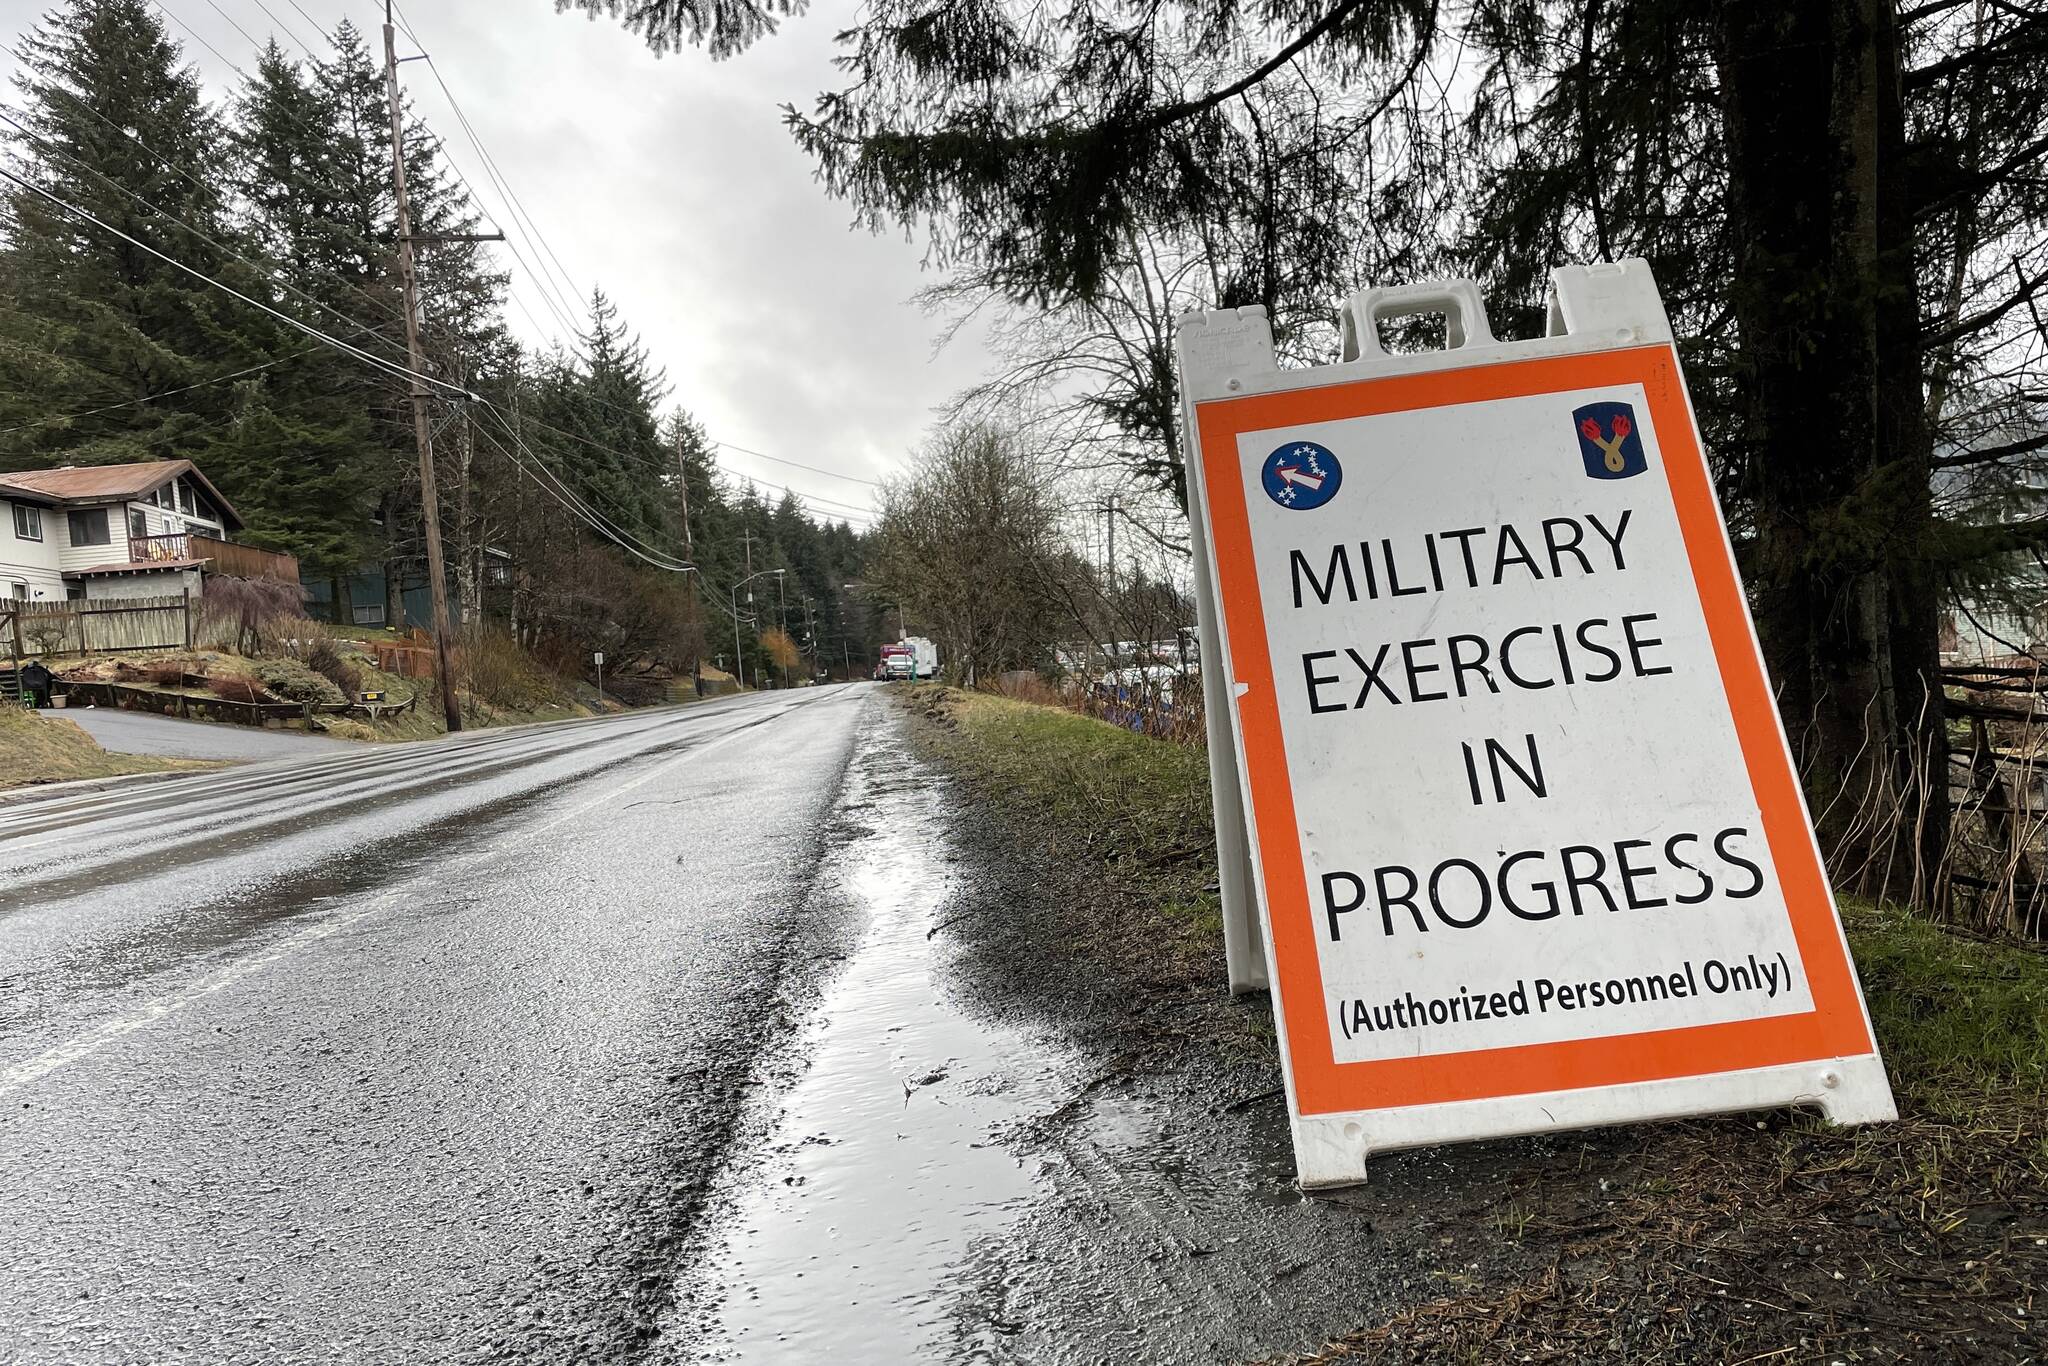 Military, federal and local organizations participated in a hazardous material emergency exercise on March 22, 2022. (Michael S. Lockett / Juneau Empire)